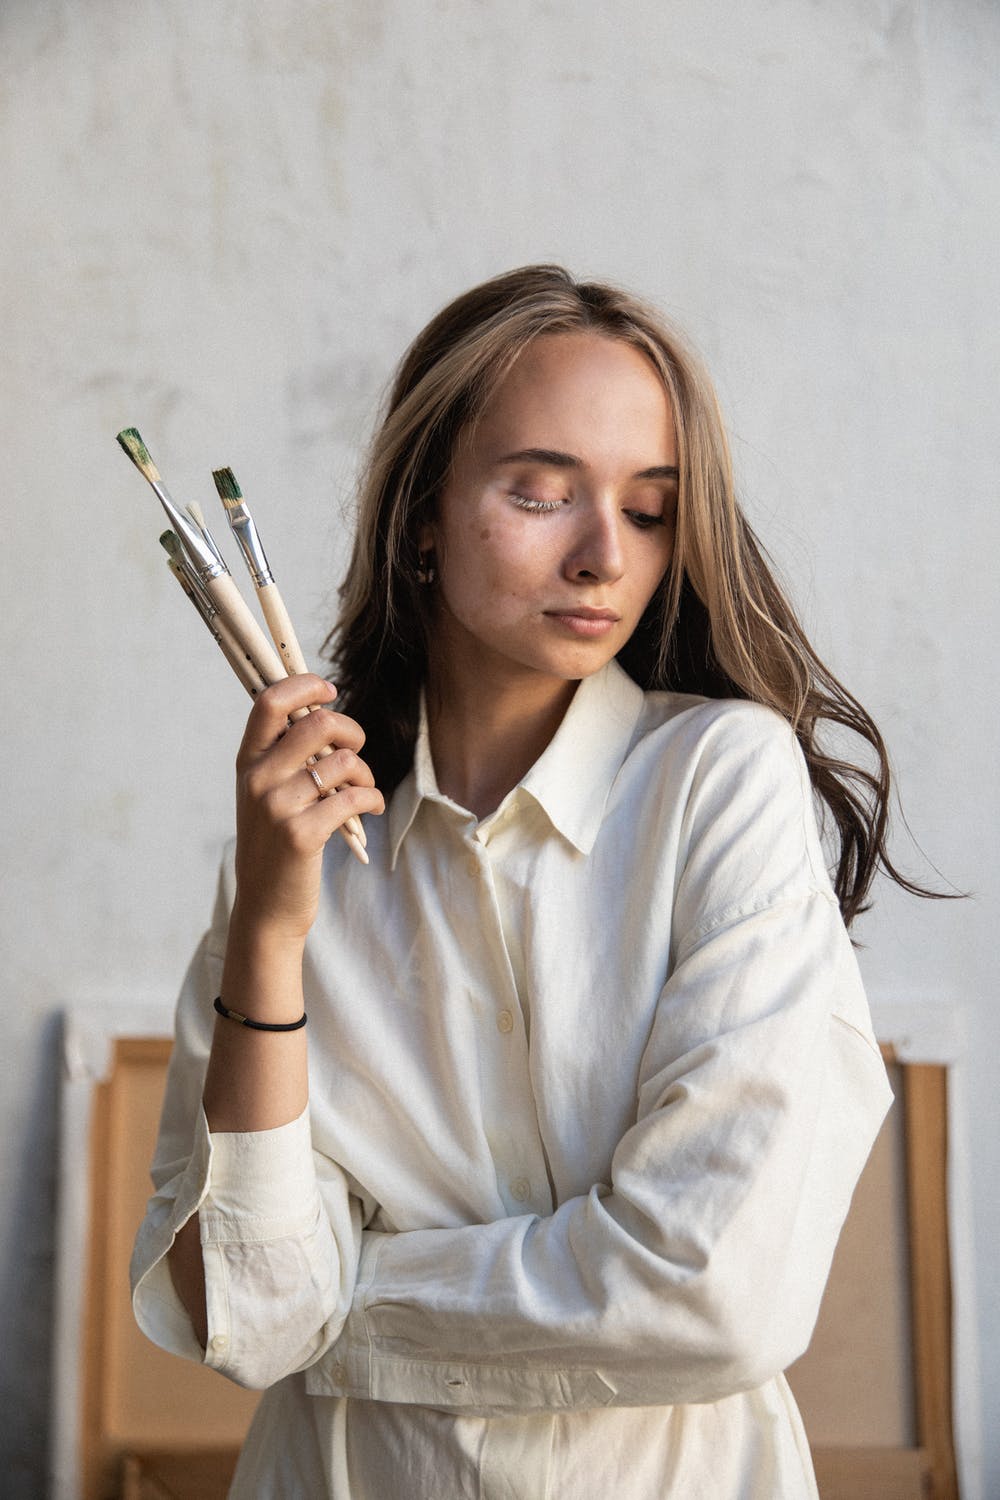 Woman with paint brushes | Source: Pexels